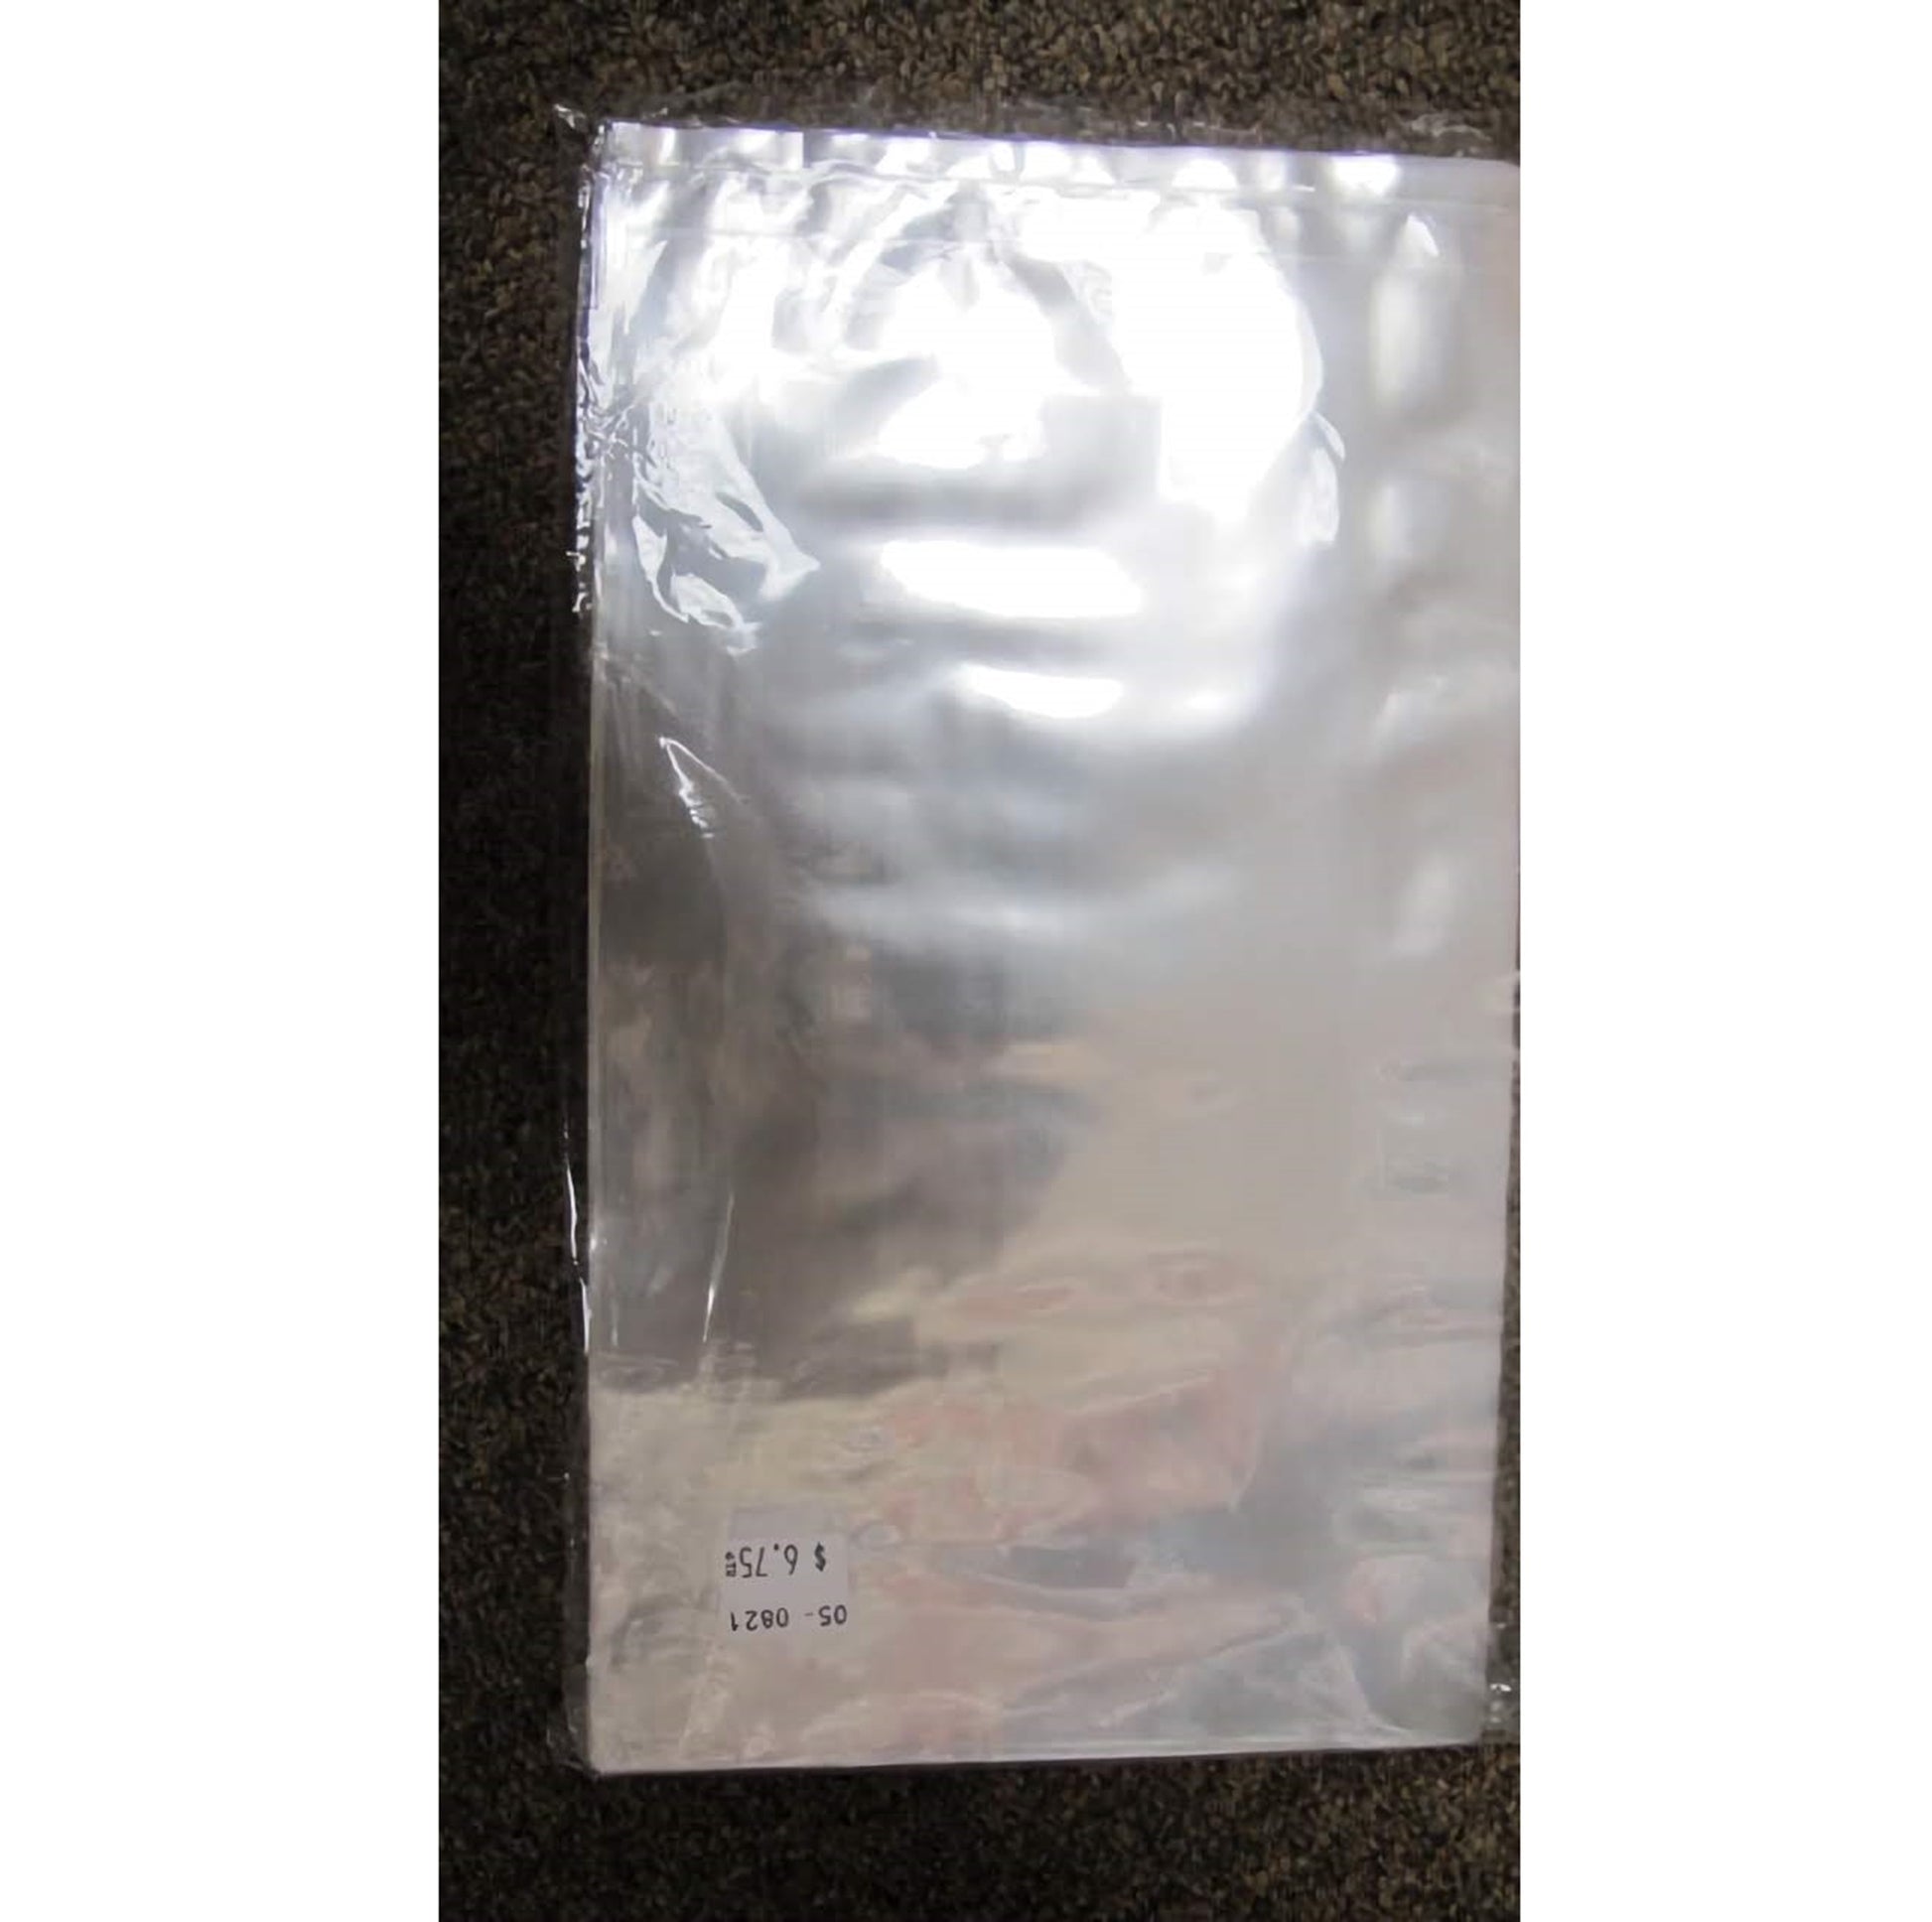 A pack of 100 clear cello bags sized 5 x 9 inches. The transparent nature of the bags reveals the colorful contents inside, suggesting they could be used for a variety of treats or gifts.